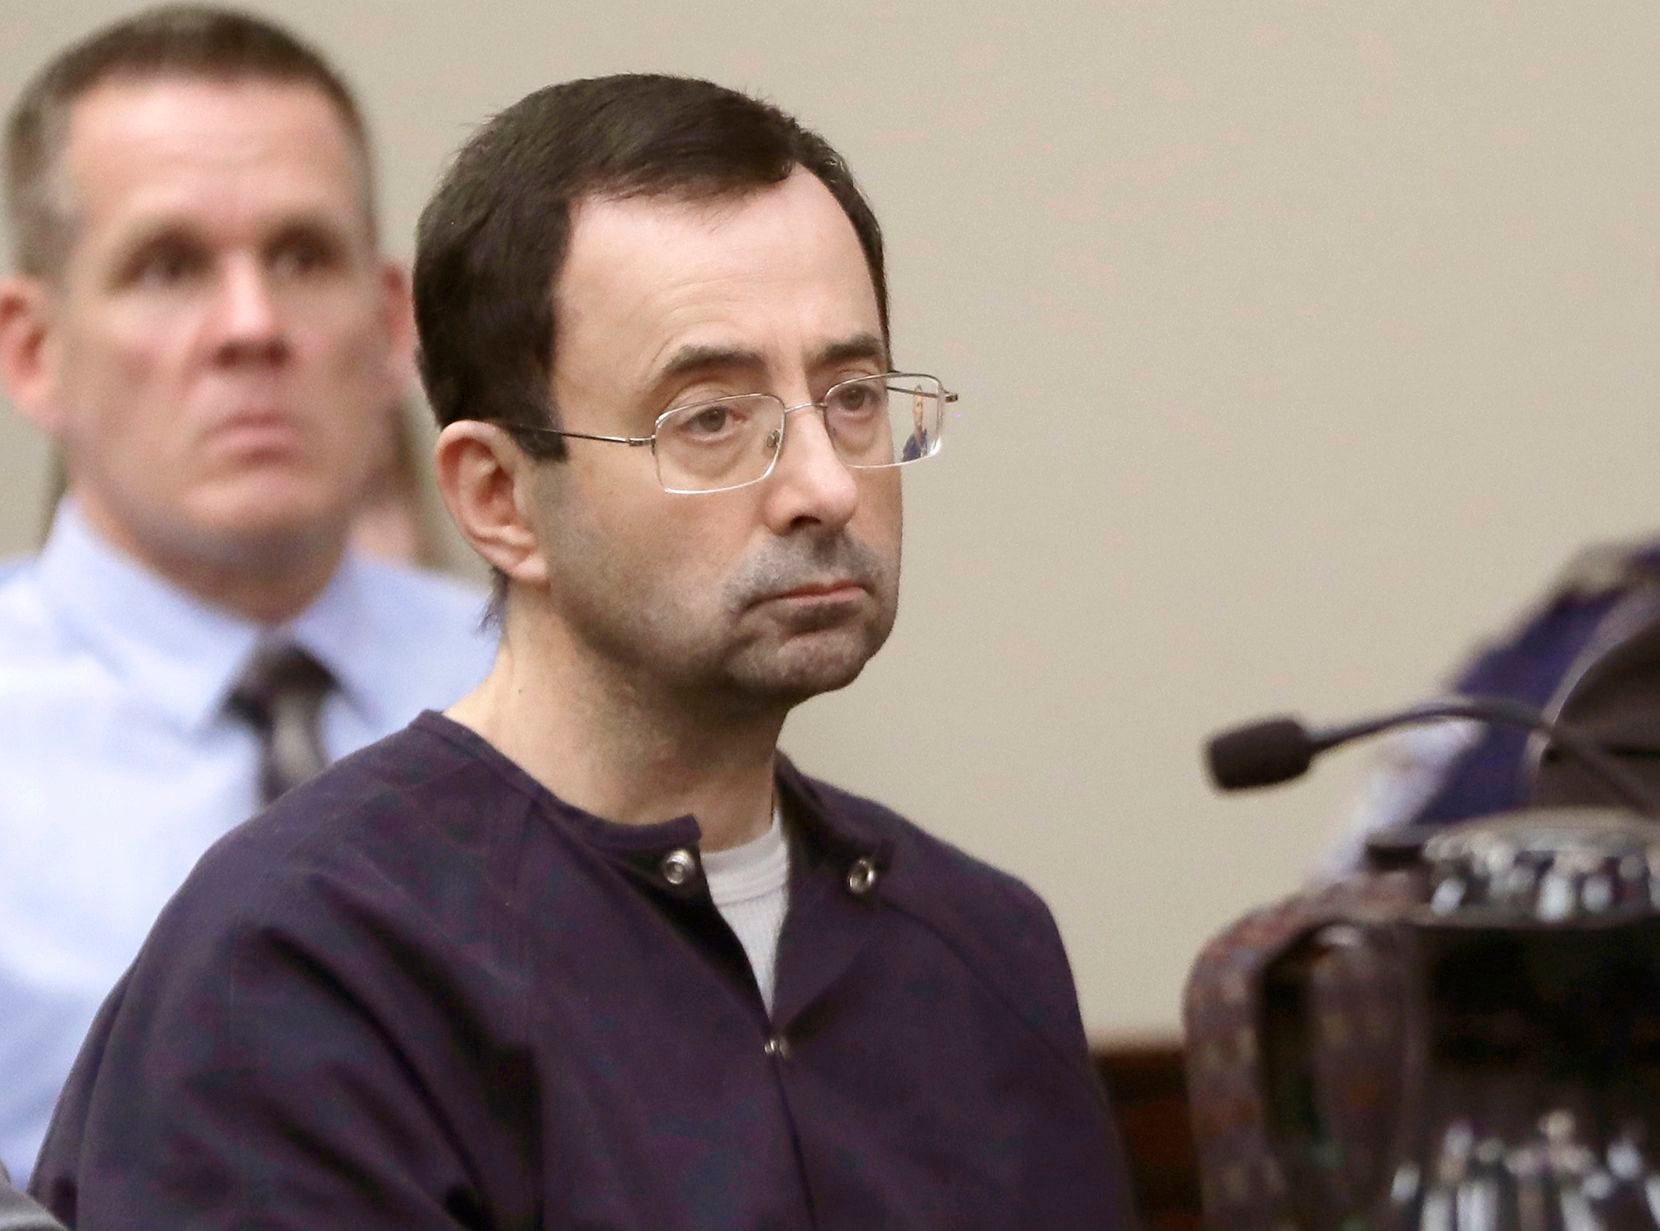 Larry Nassar, a former doctor for USA Gymnastics and member of Michigan State University's...